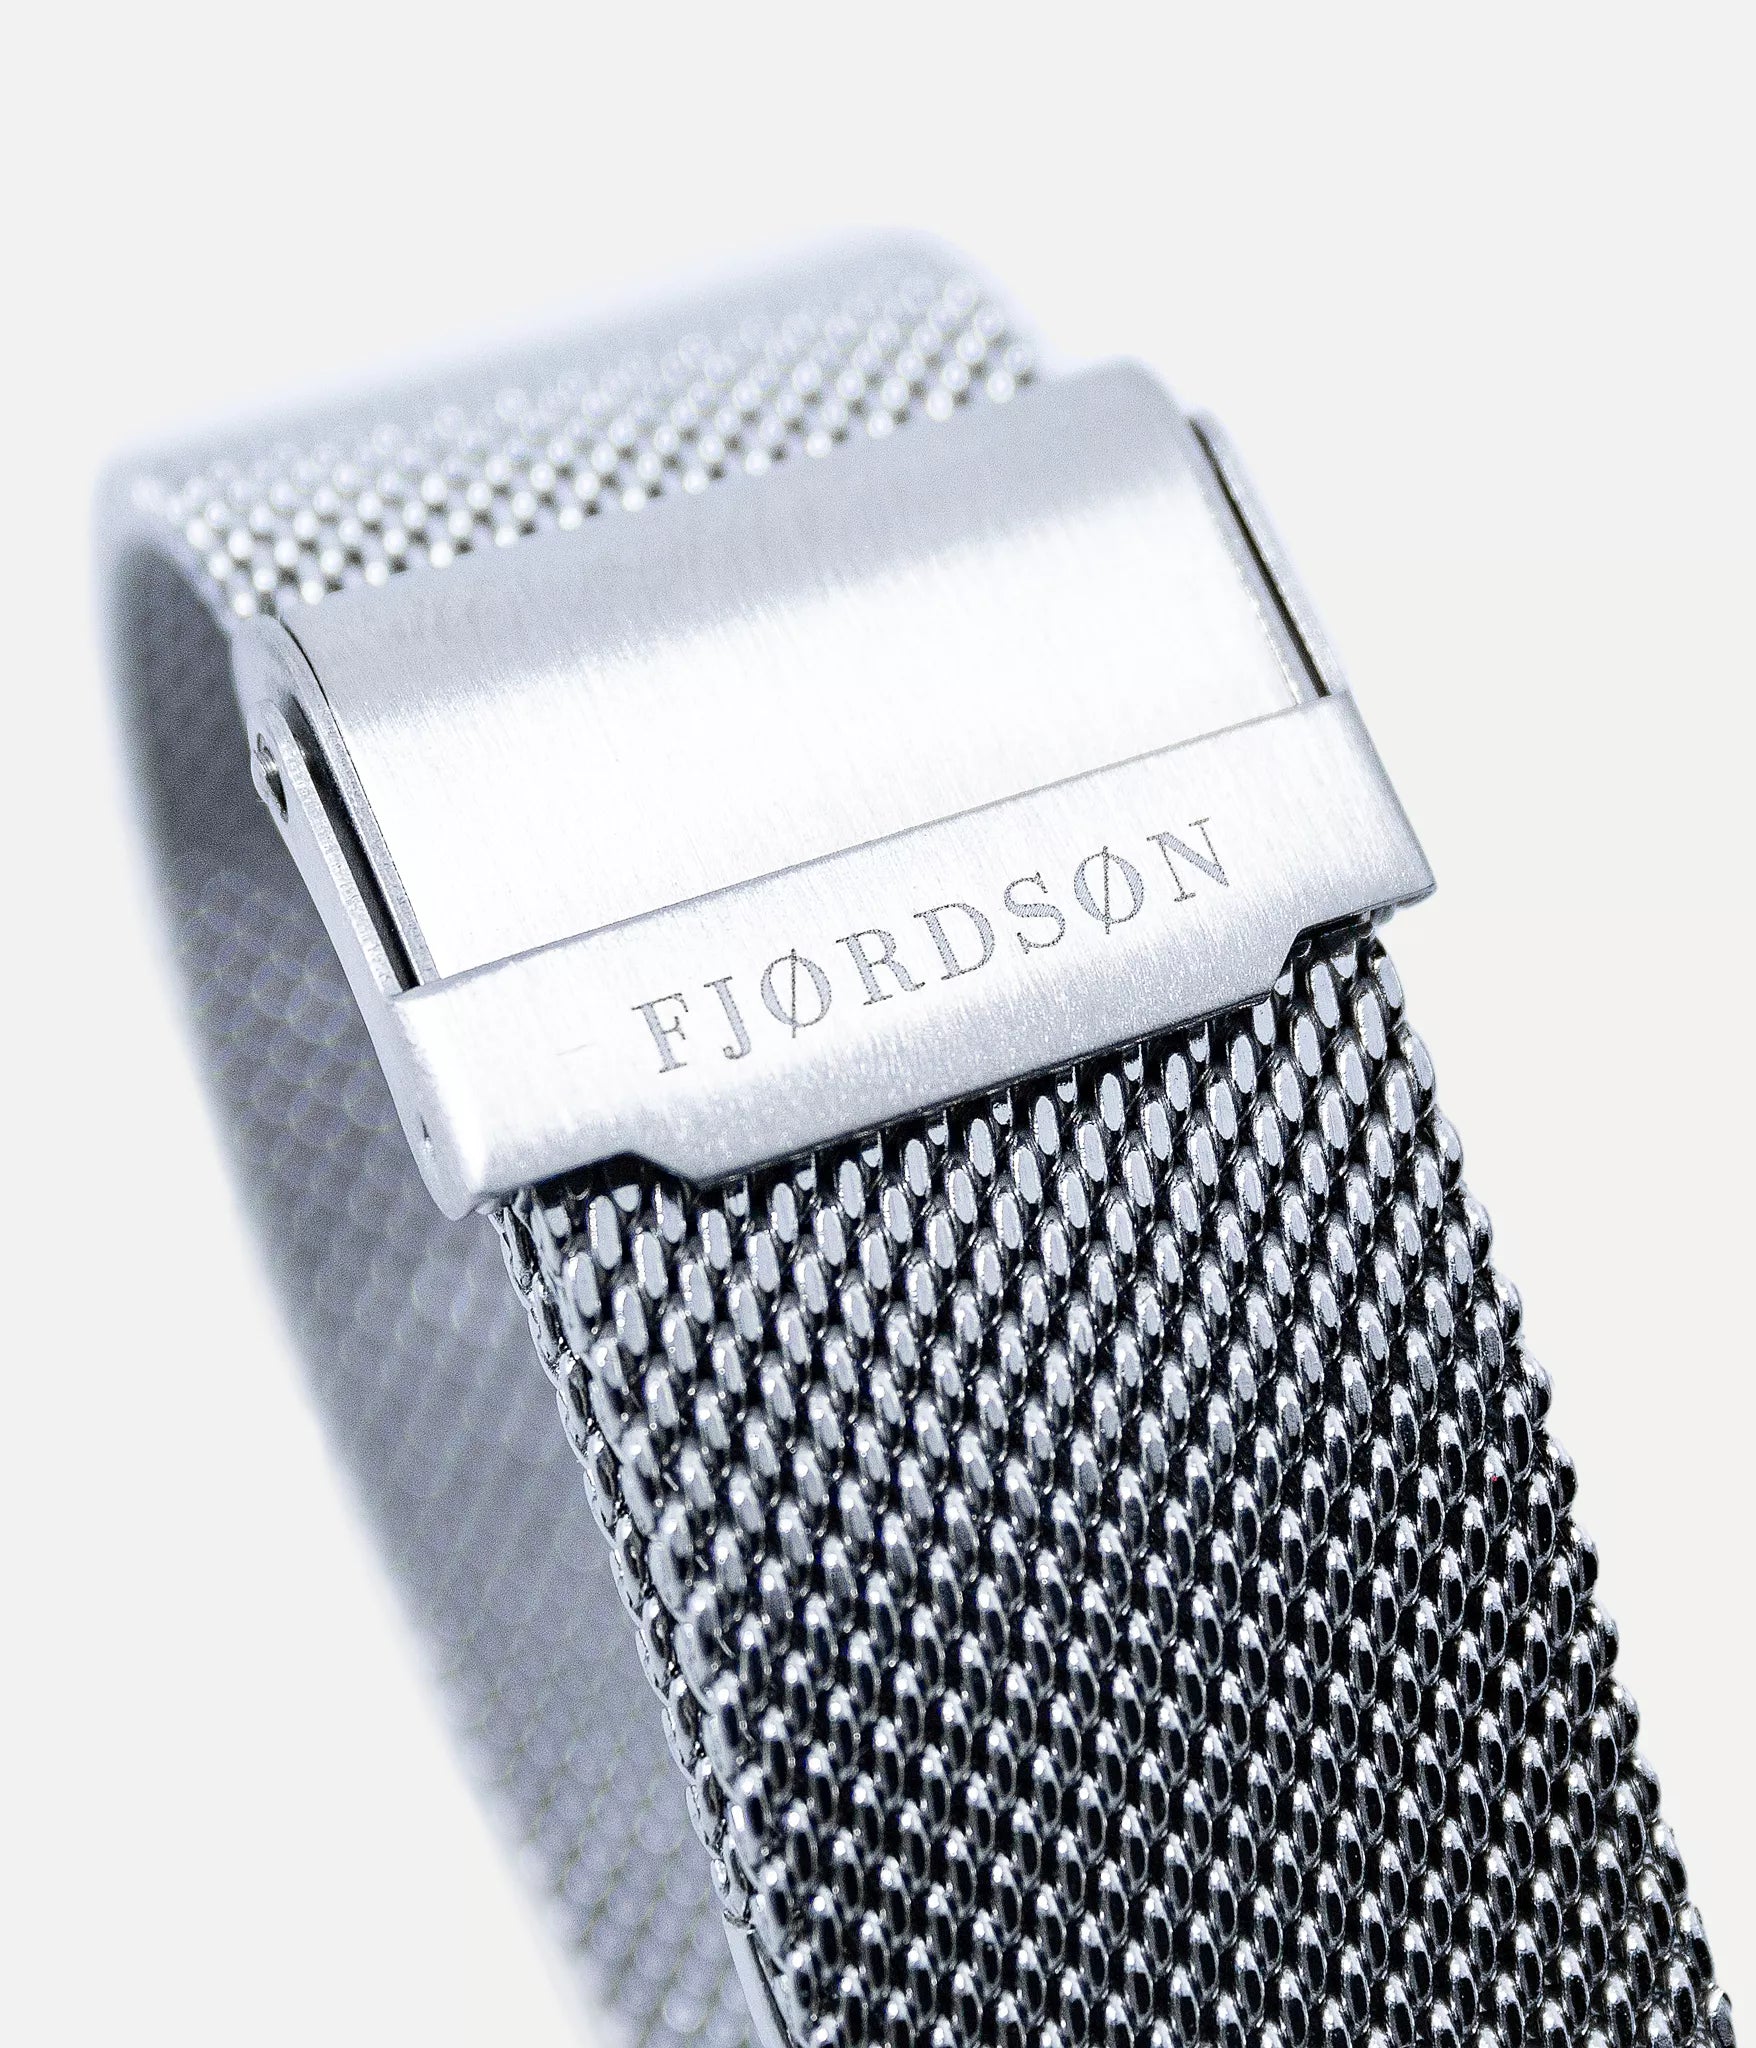 Strap detail shot - Fjordson matching watches with white dial and silver metal watch strap - Couple Watches Gift set - vegan & approved by PETA - Swiss made